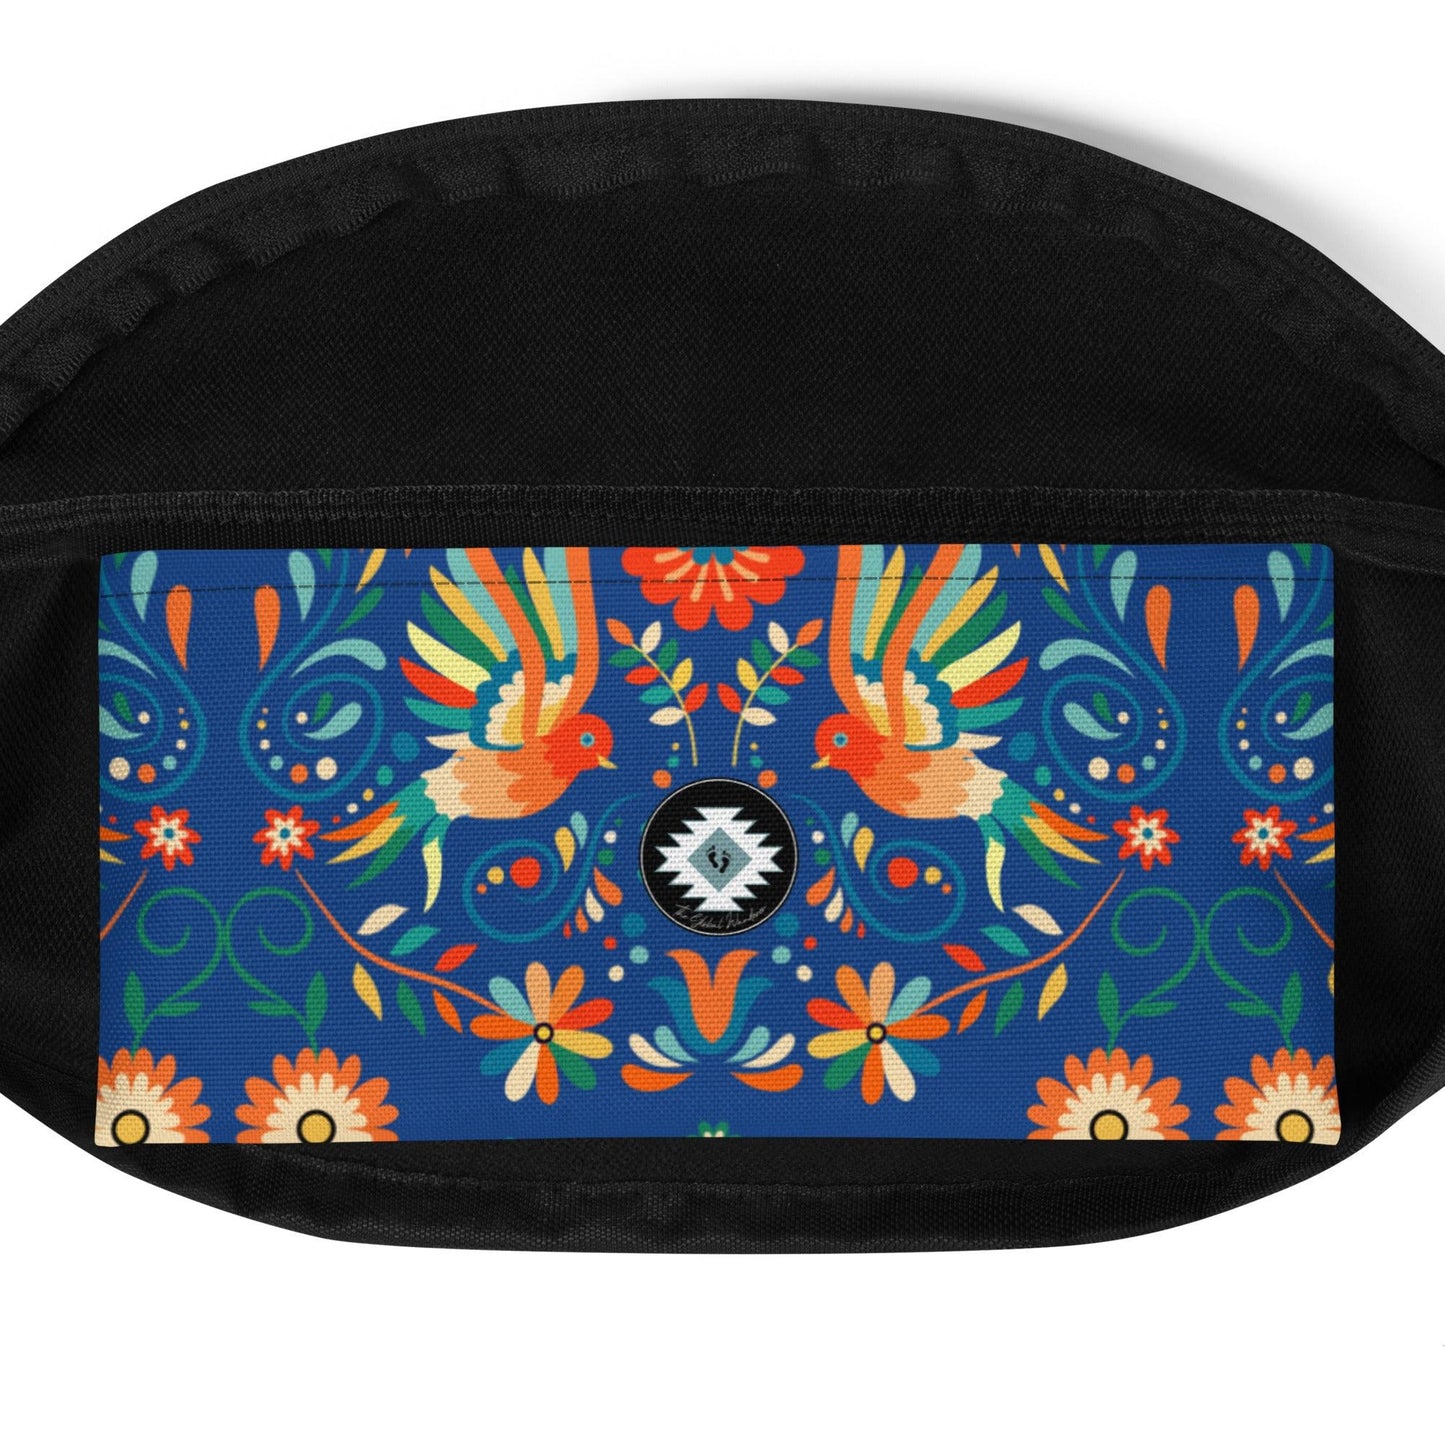 Mexican Otomi Print Fanny Pack - The Global Wanderer